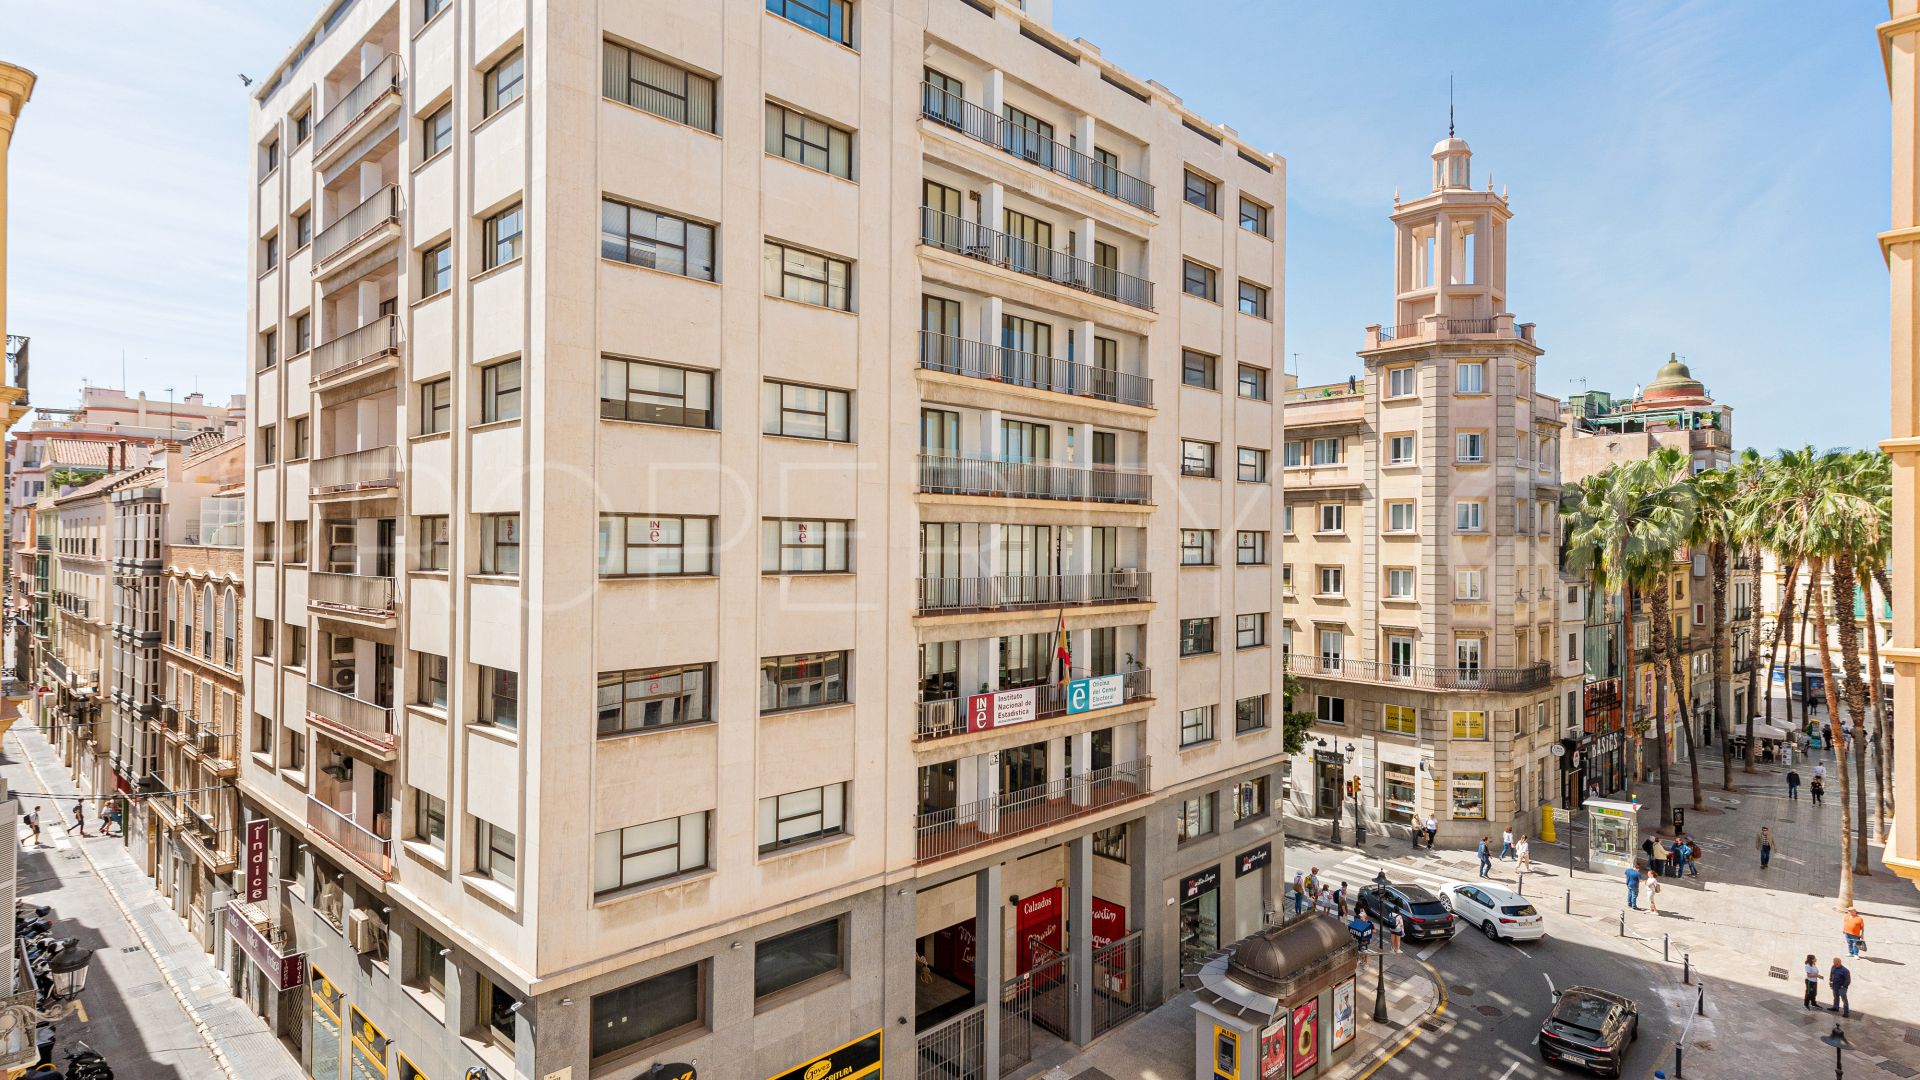 2 bedrooms apartment in Malaga for sale